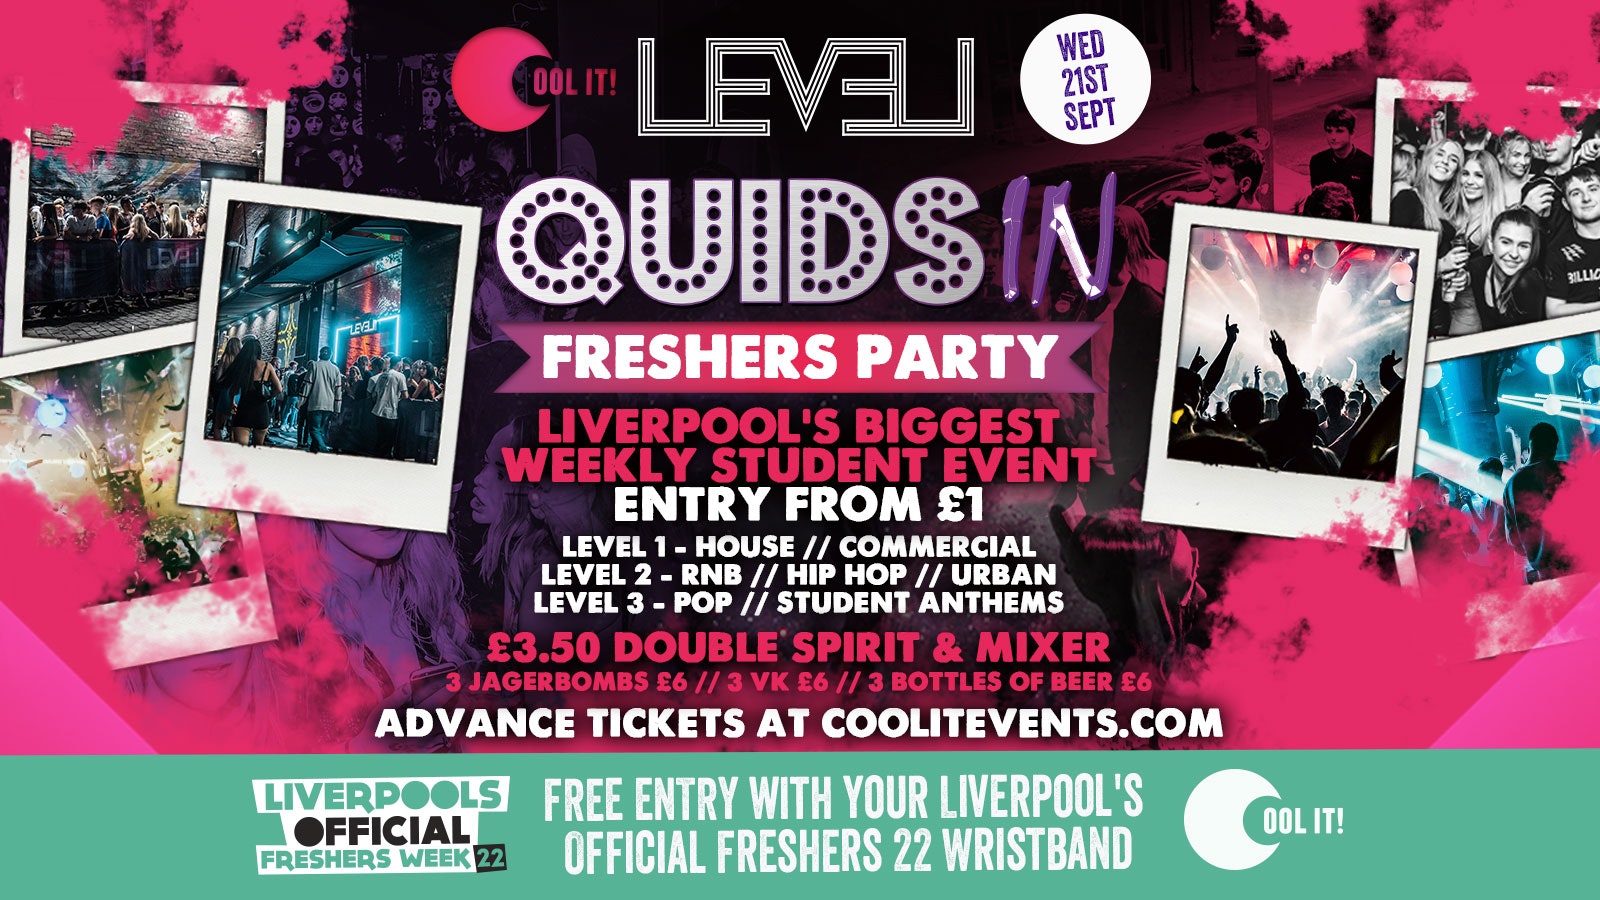 DAY 4 – Quids In Wednesdays : Freshers Reopening Special – FREE ENTRY WITH YOUR OFFICIAL FRESHERS WRISTBAND!